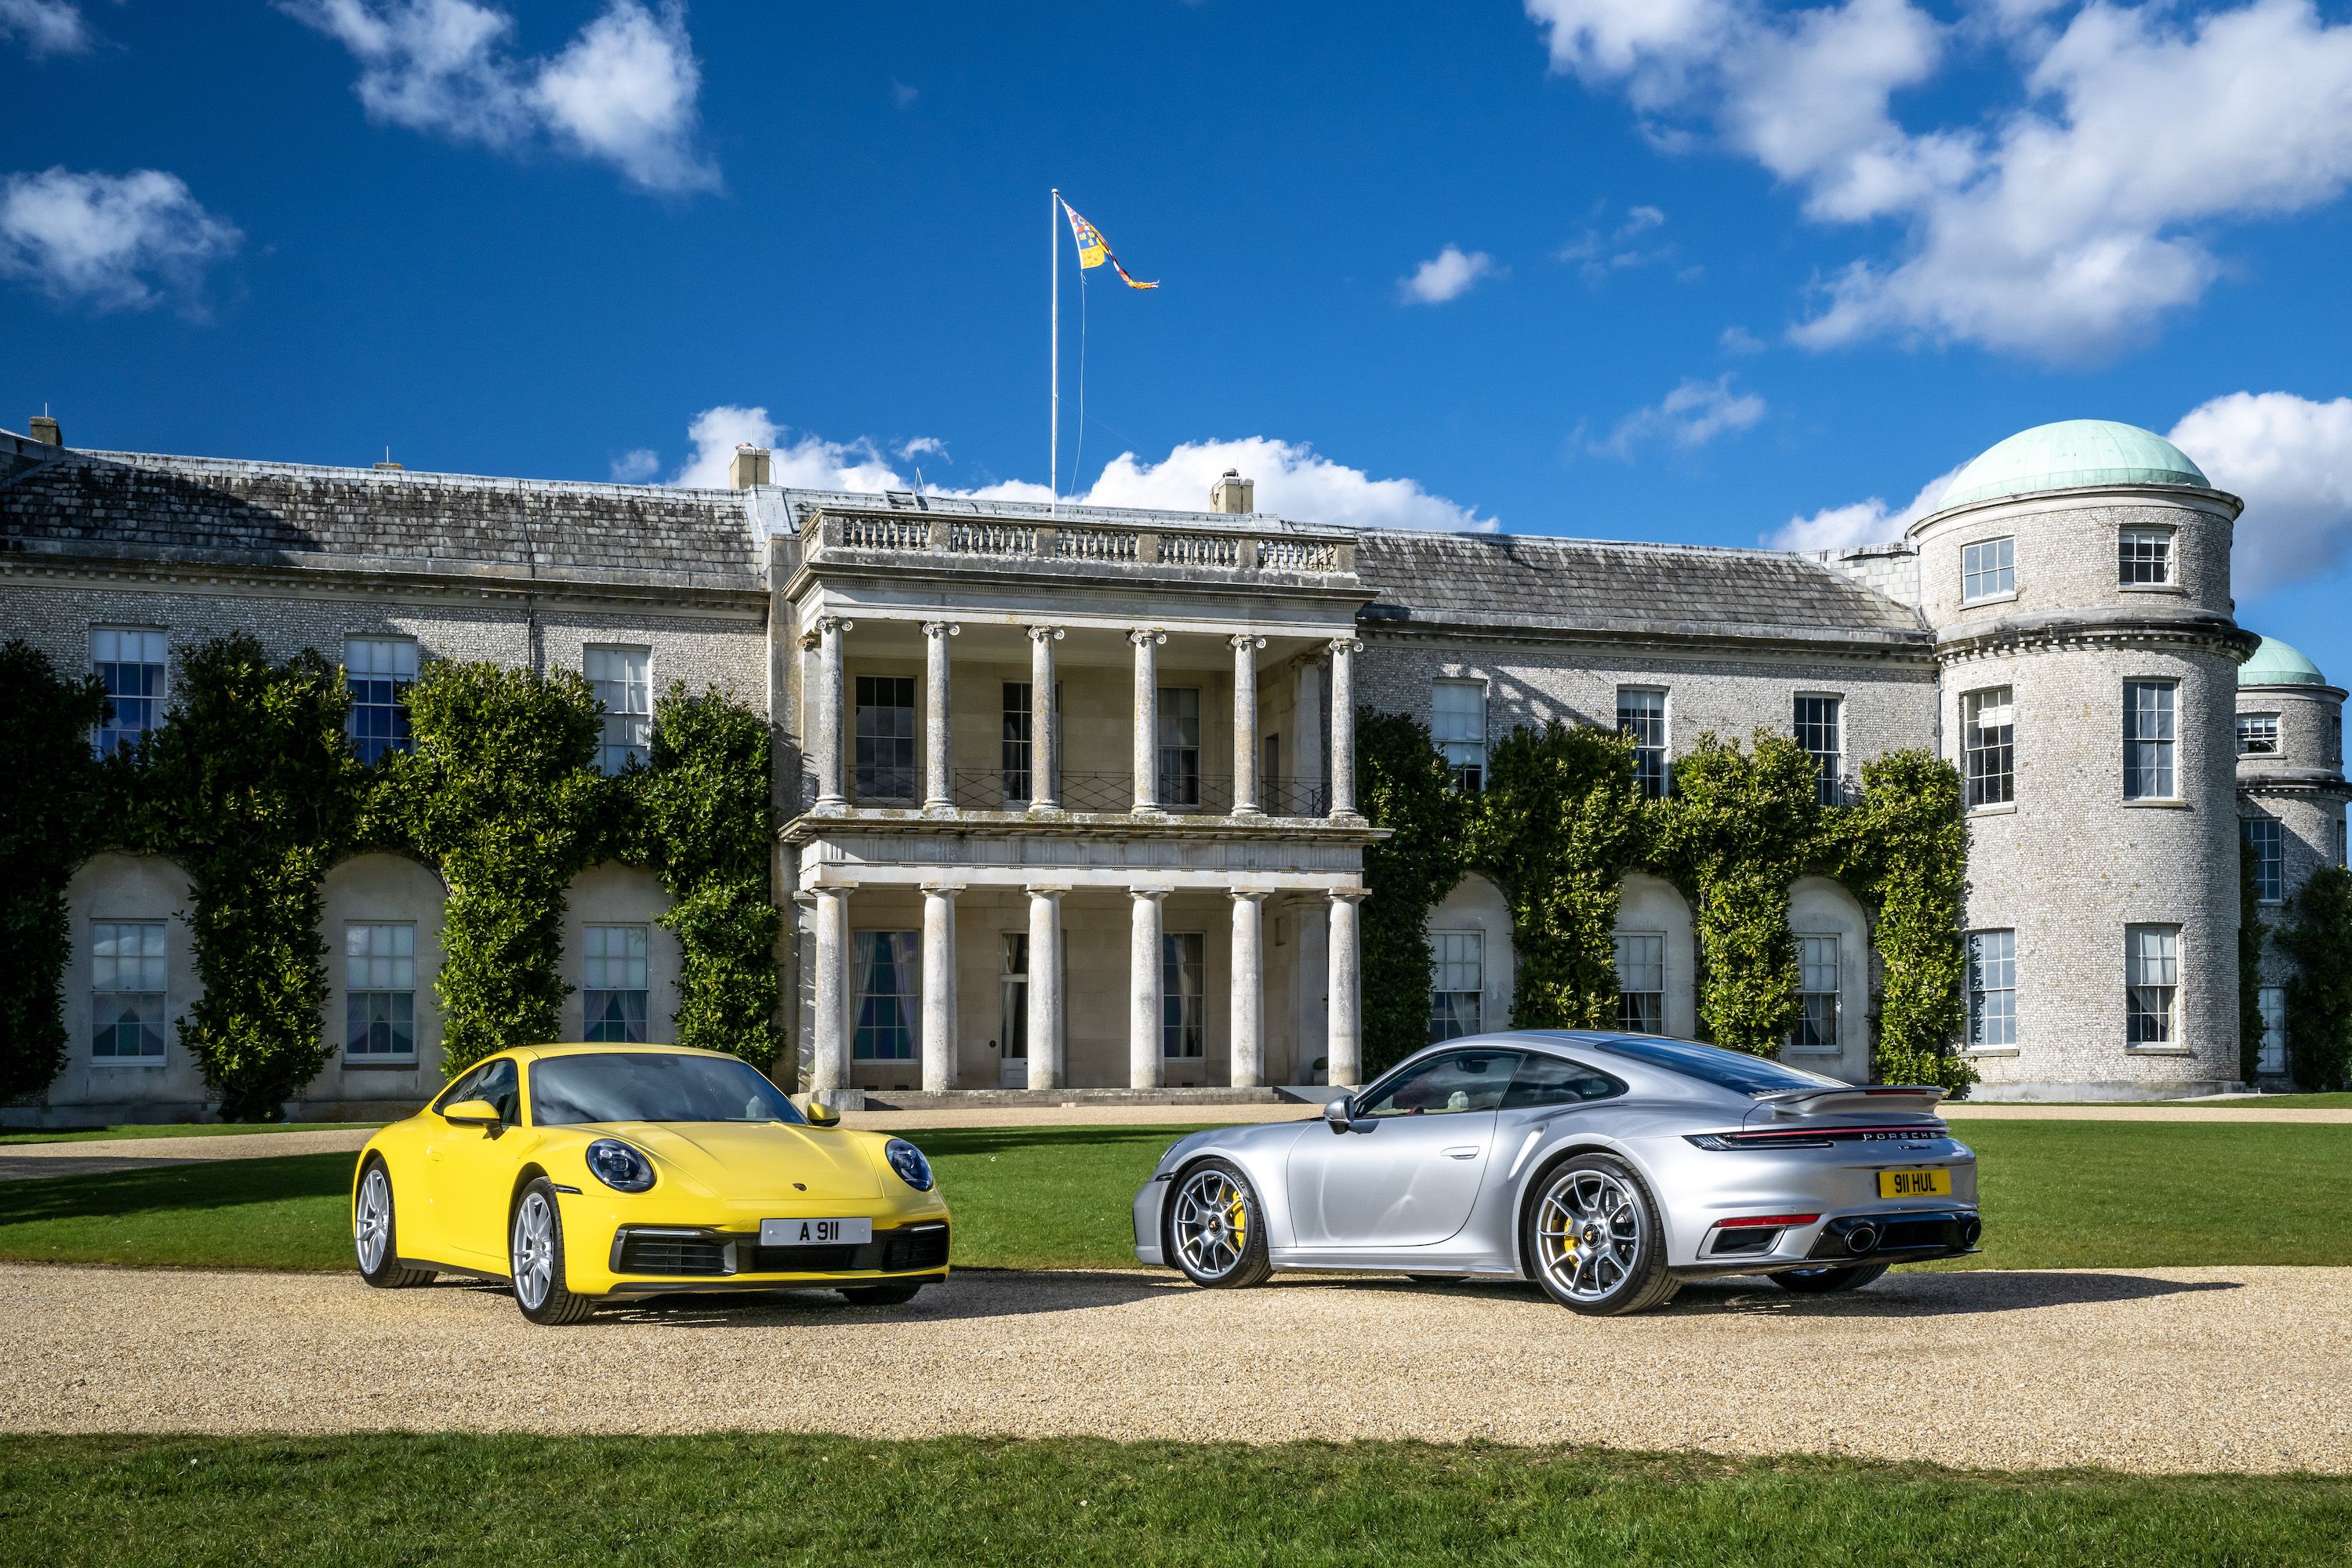 Porsche to Star at This Year's Goodwood Festival of Speed